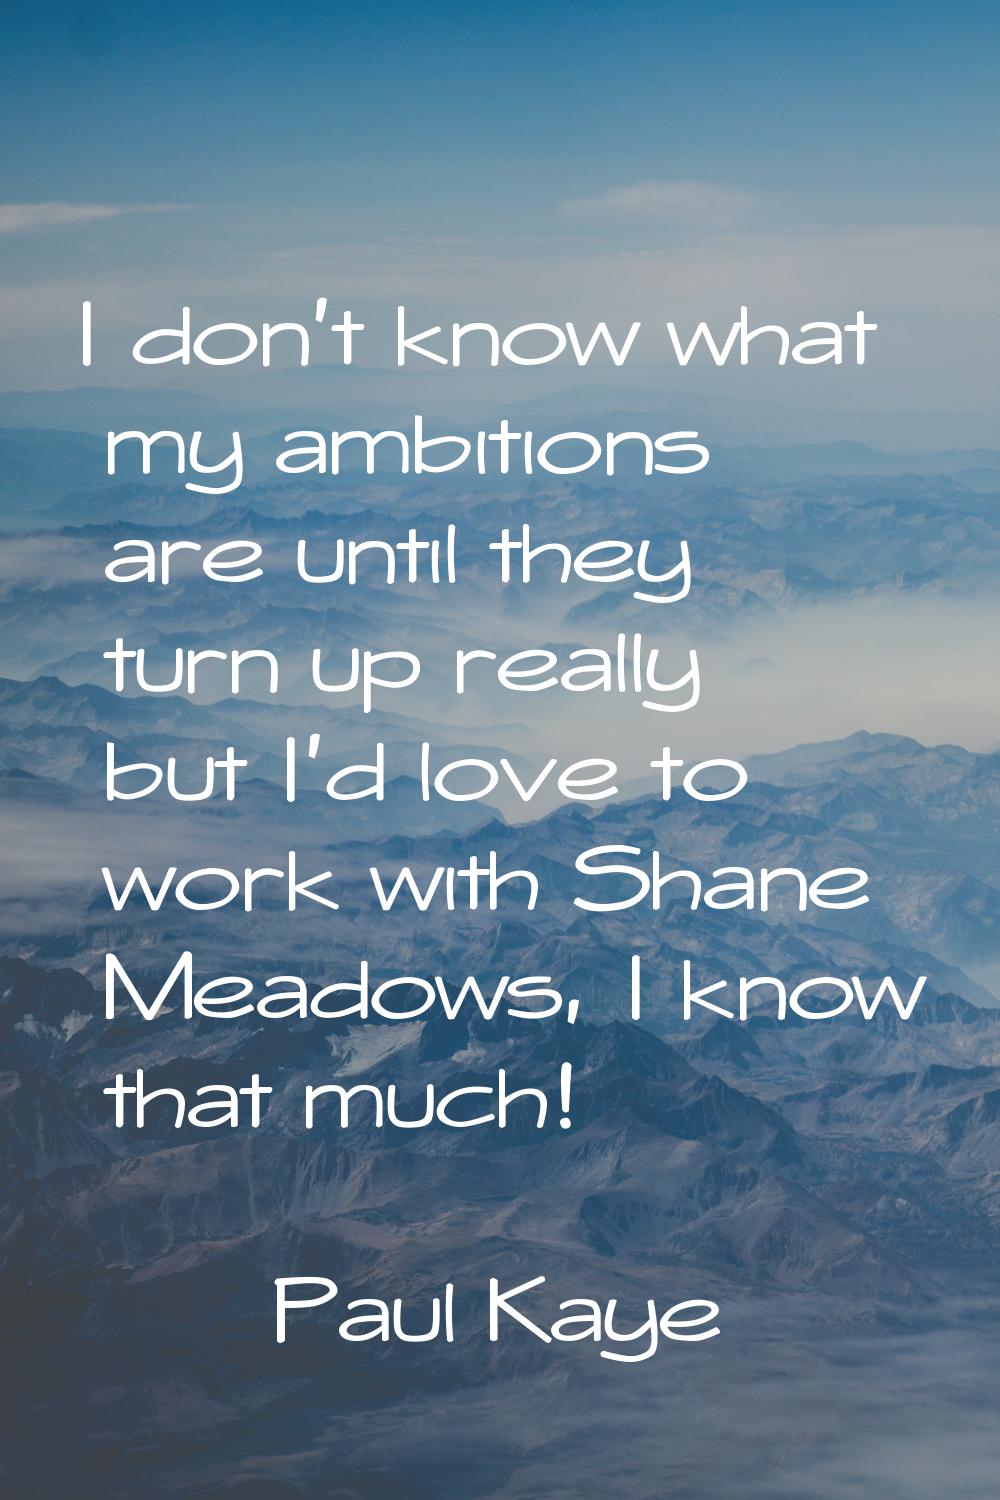 I don't know what my ambitions are until they turn up really but I'd love to work with Shane Meadow